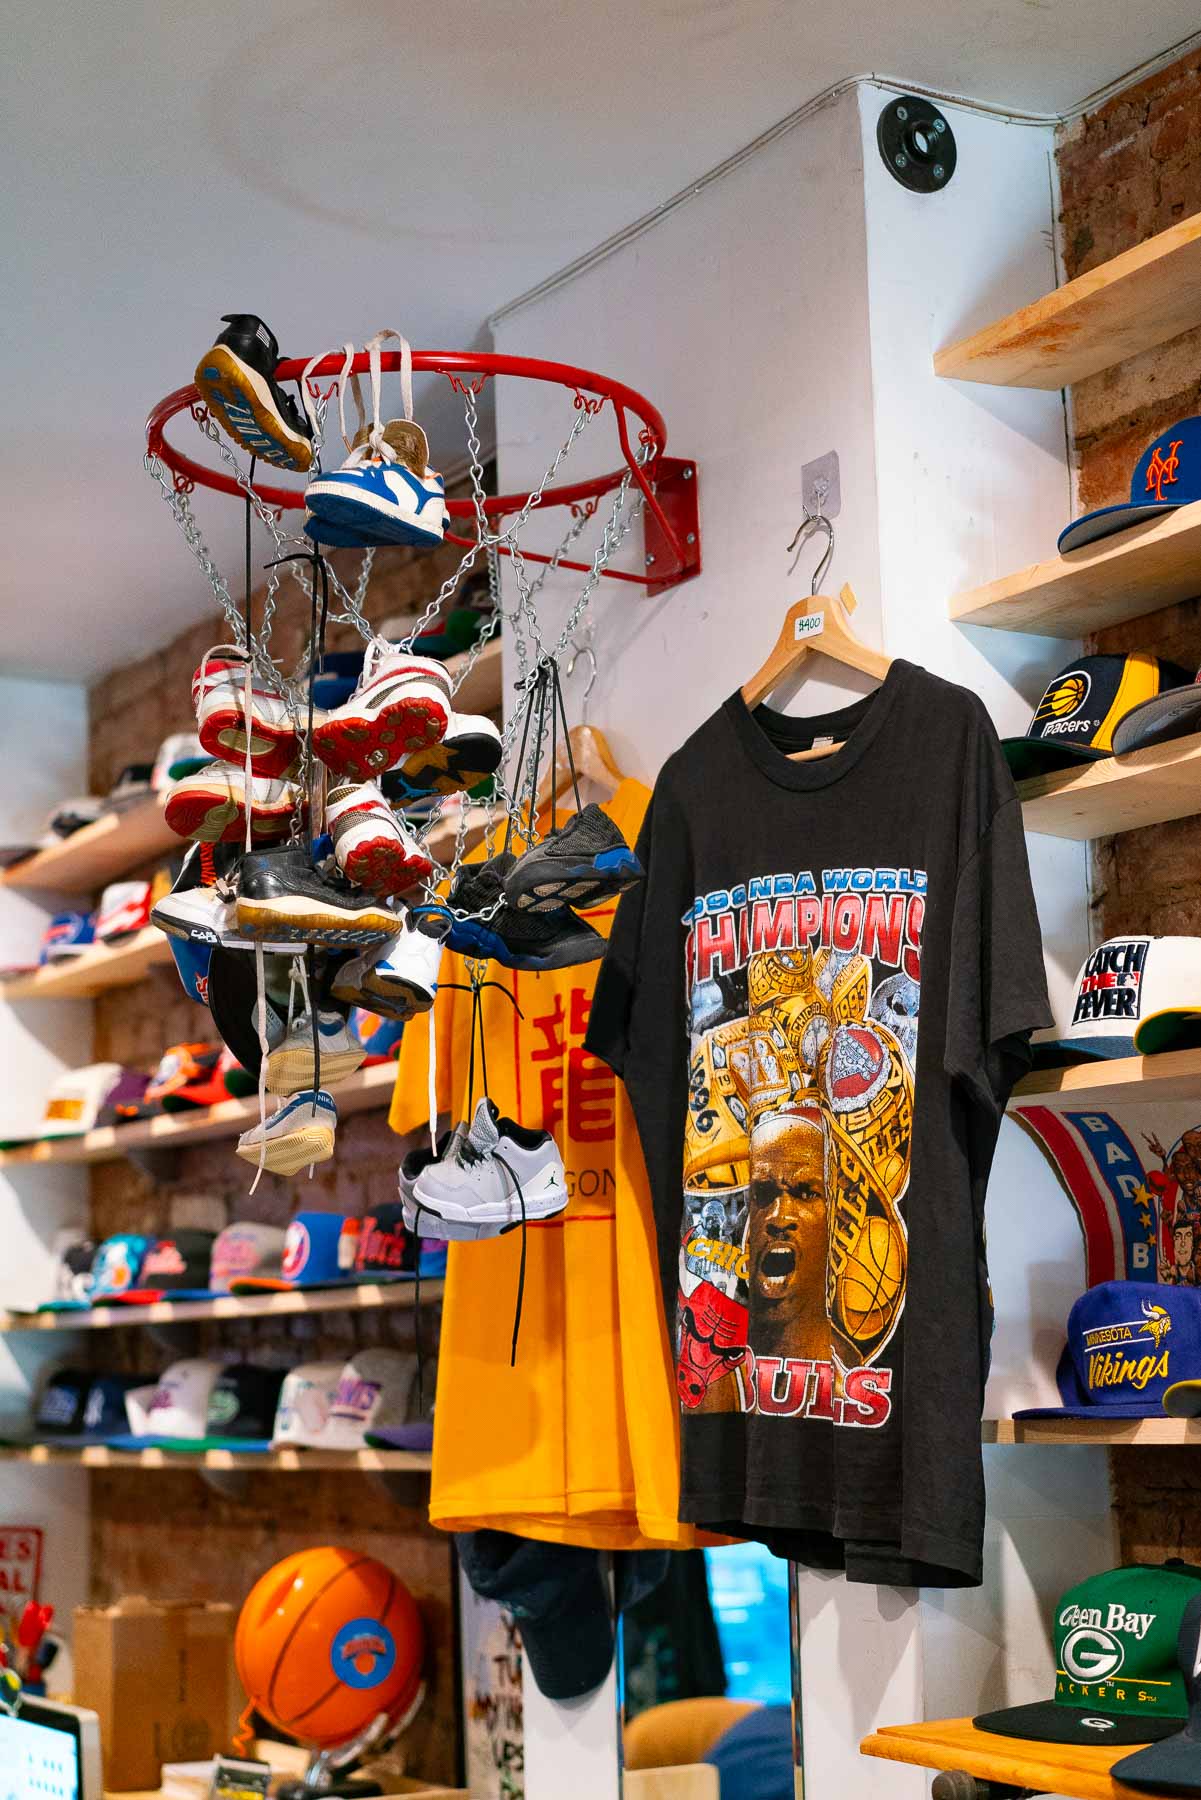 Baby-sized Jordans (shoes) hanging off a basketball rim attached to the wall with basketball-themed t-shirts and shelves full of hats at Mr. Throwback, one of the best vintage stores in New York City